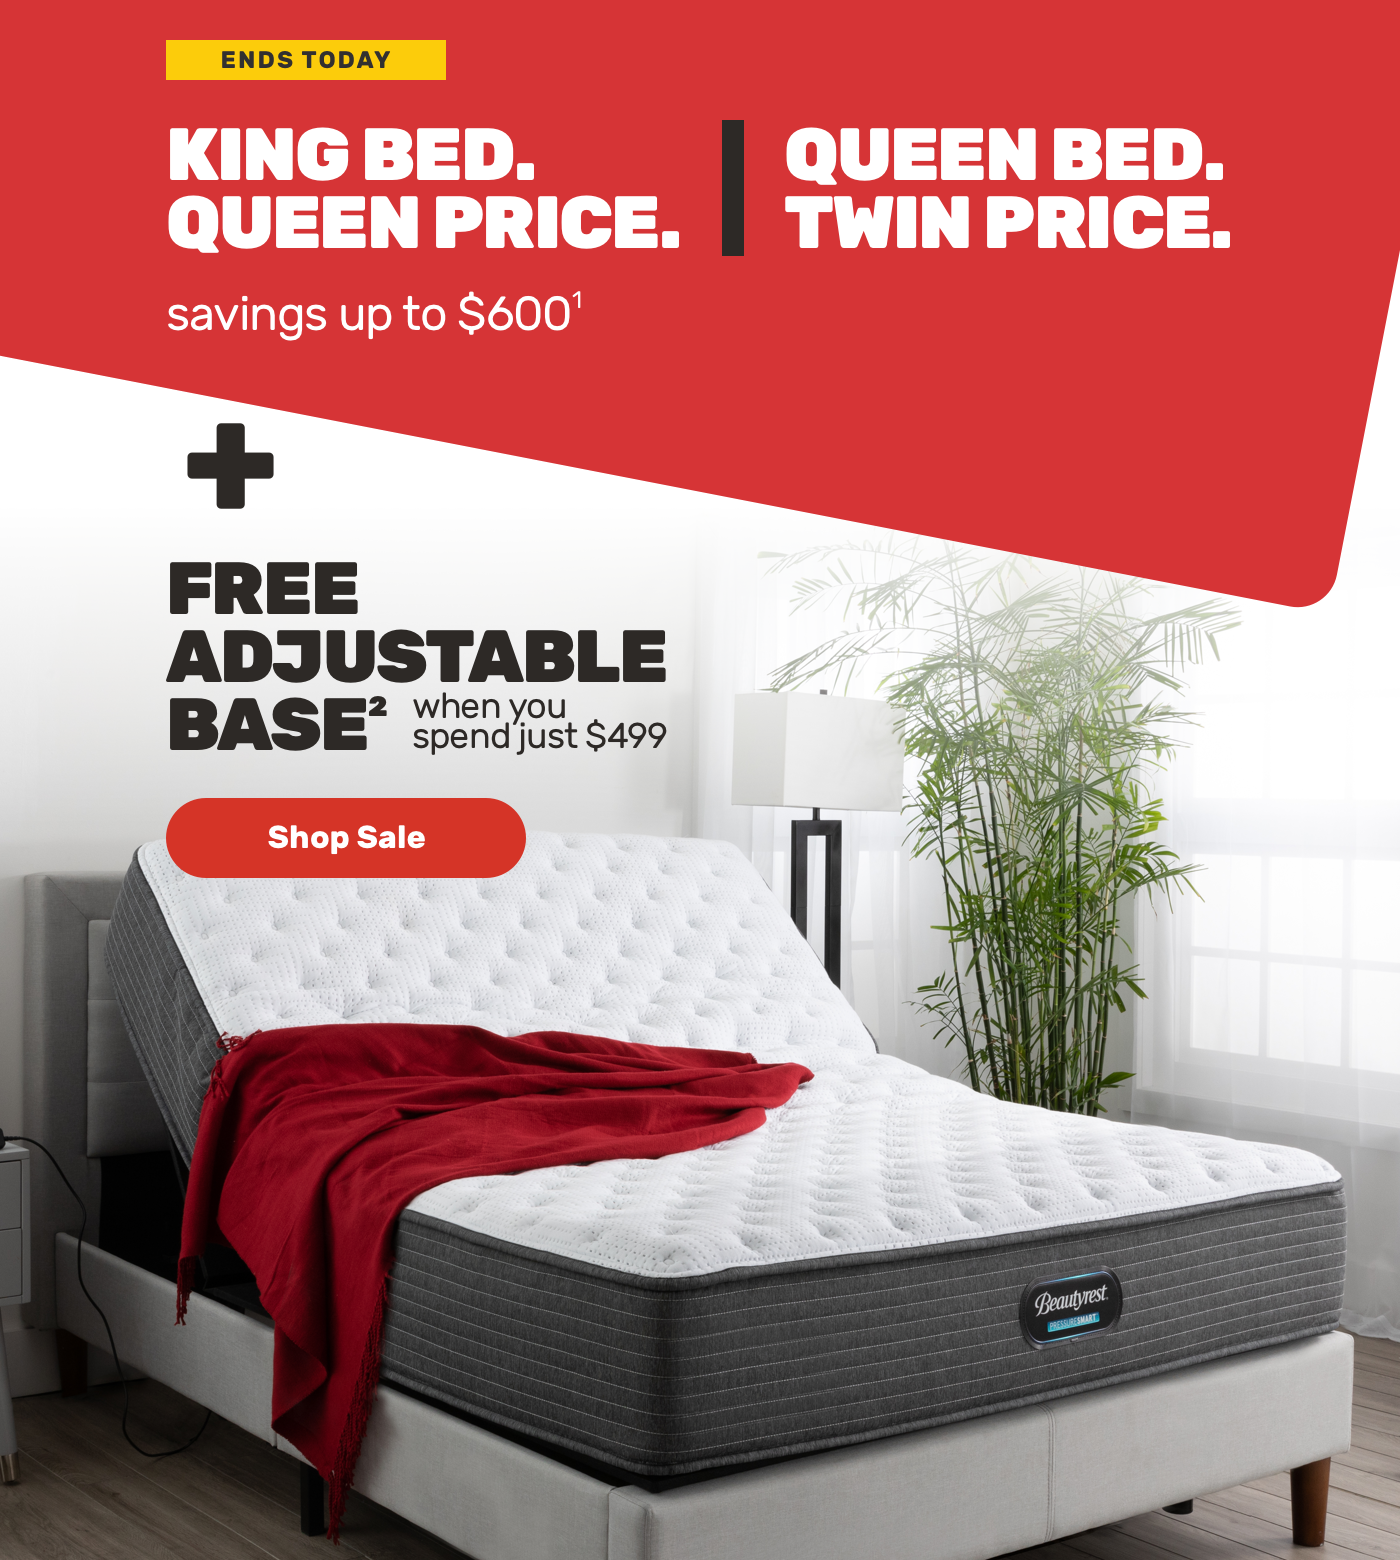 Ends Today. King Bed. Queen Price. Queen Bed. Twin Price.